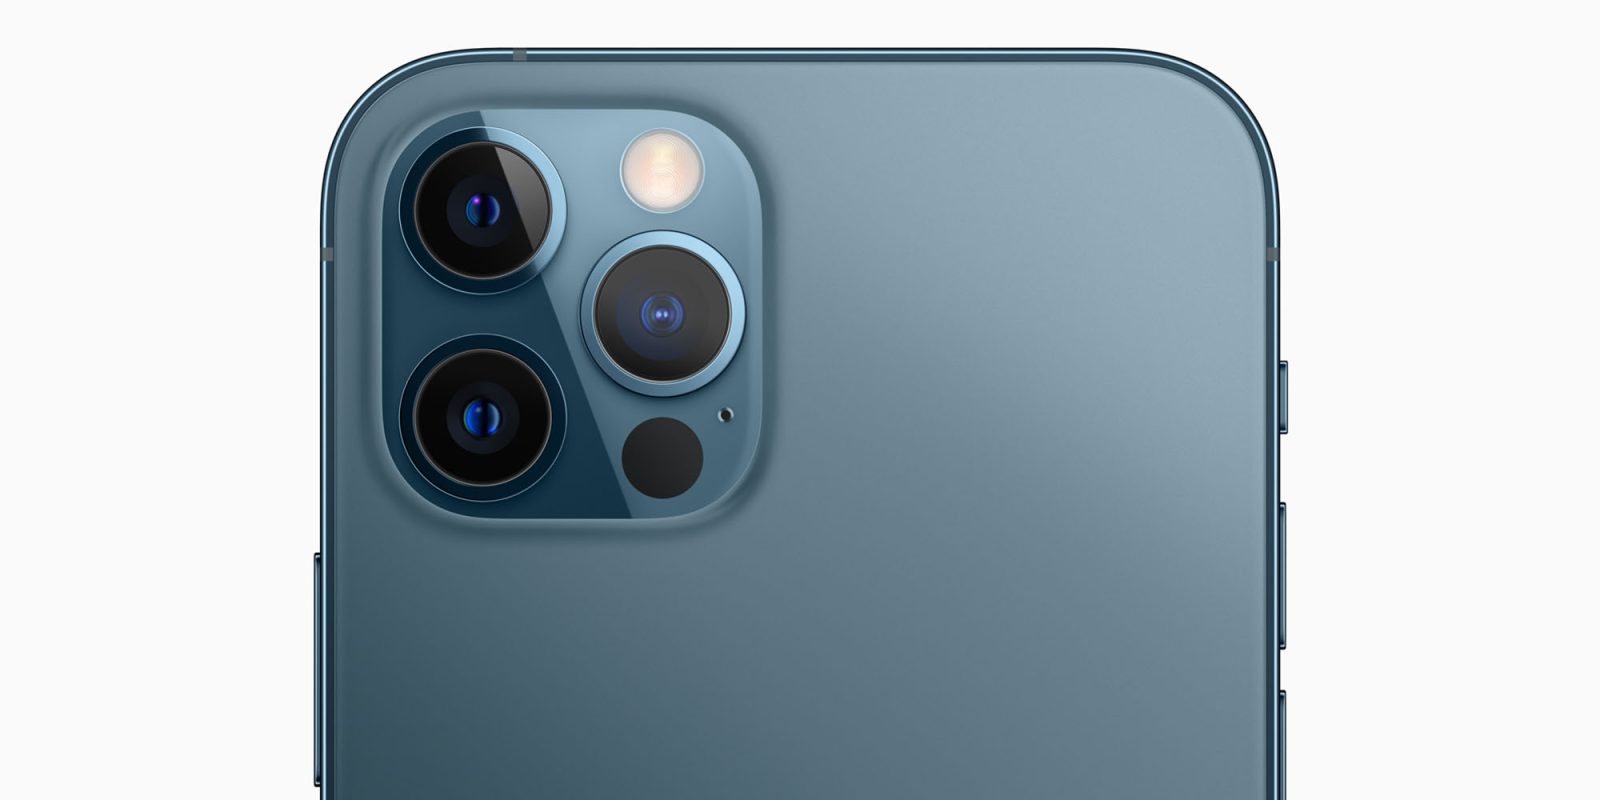 iPhone lens improvements in 2021 and 2022